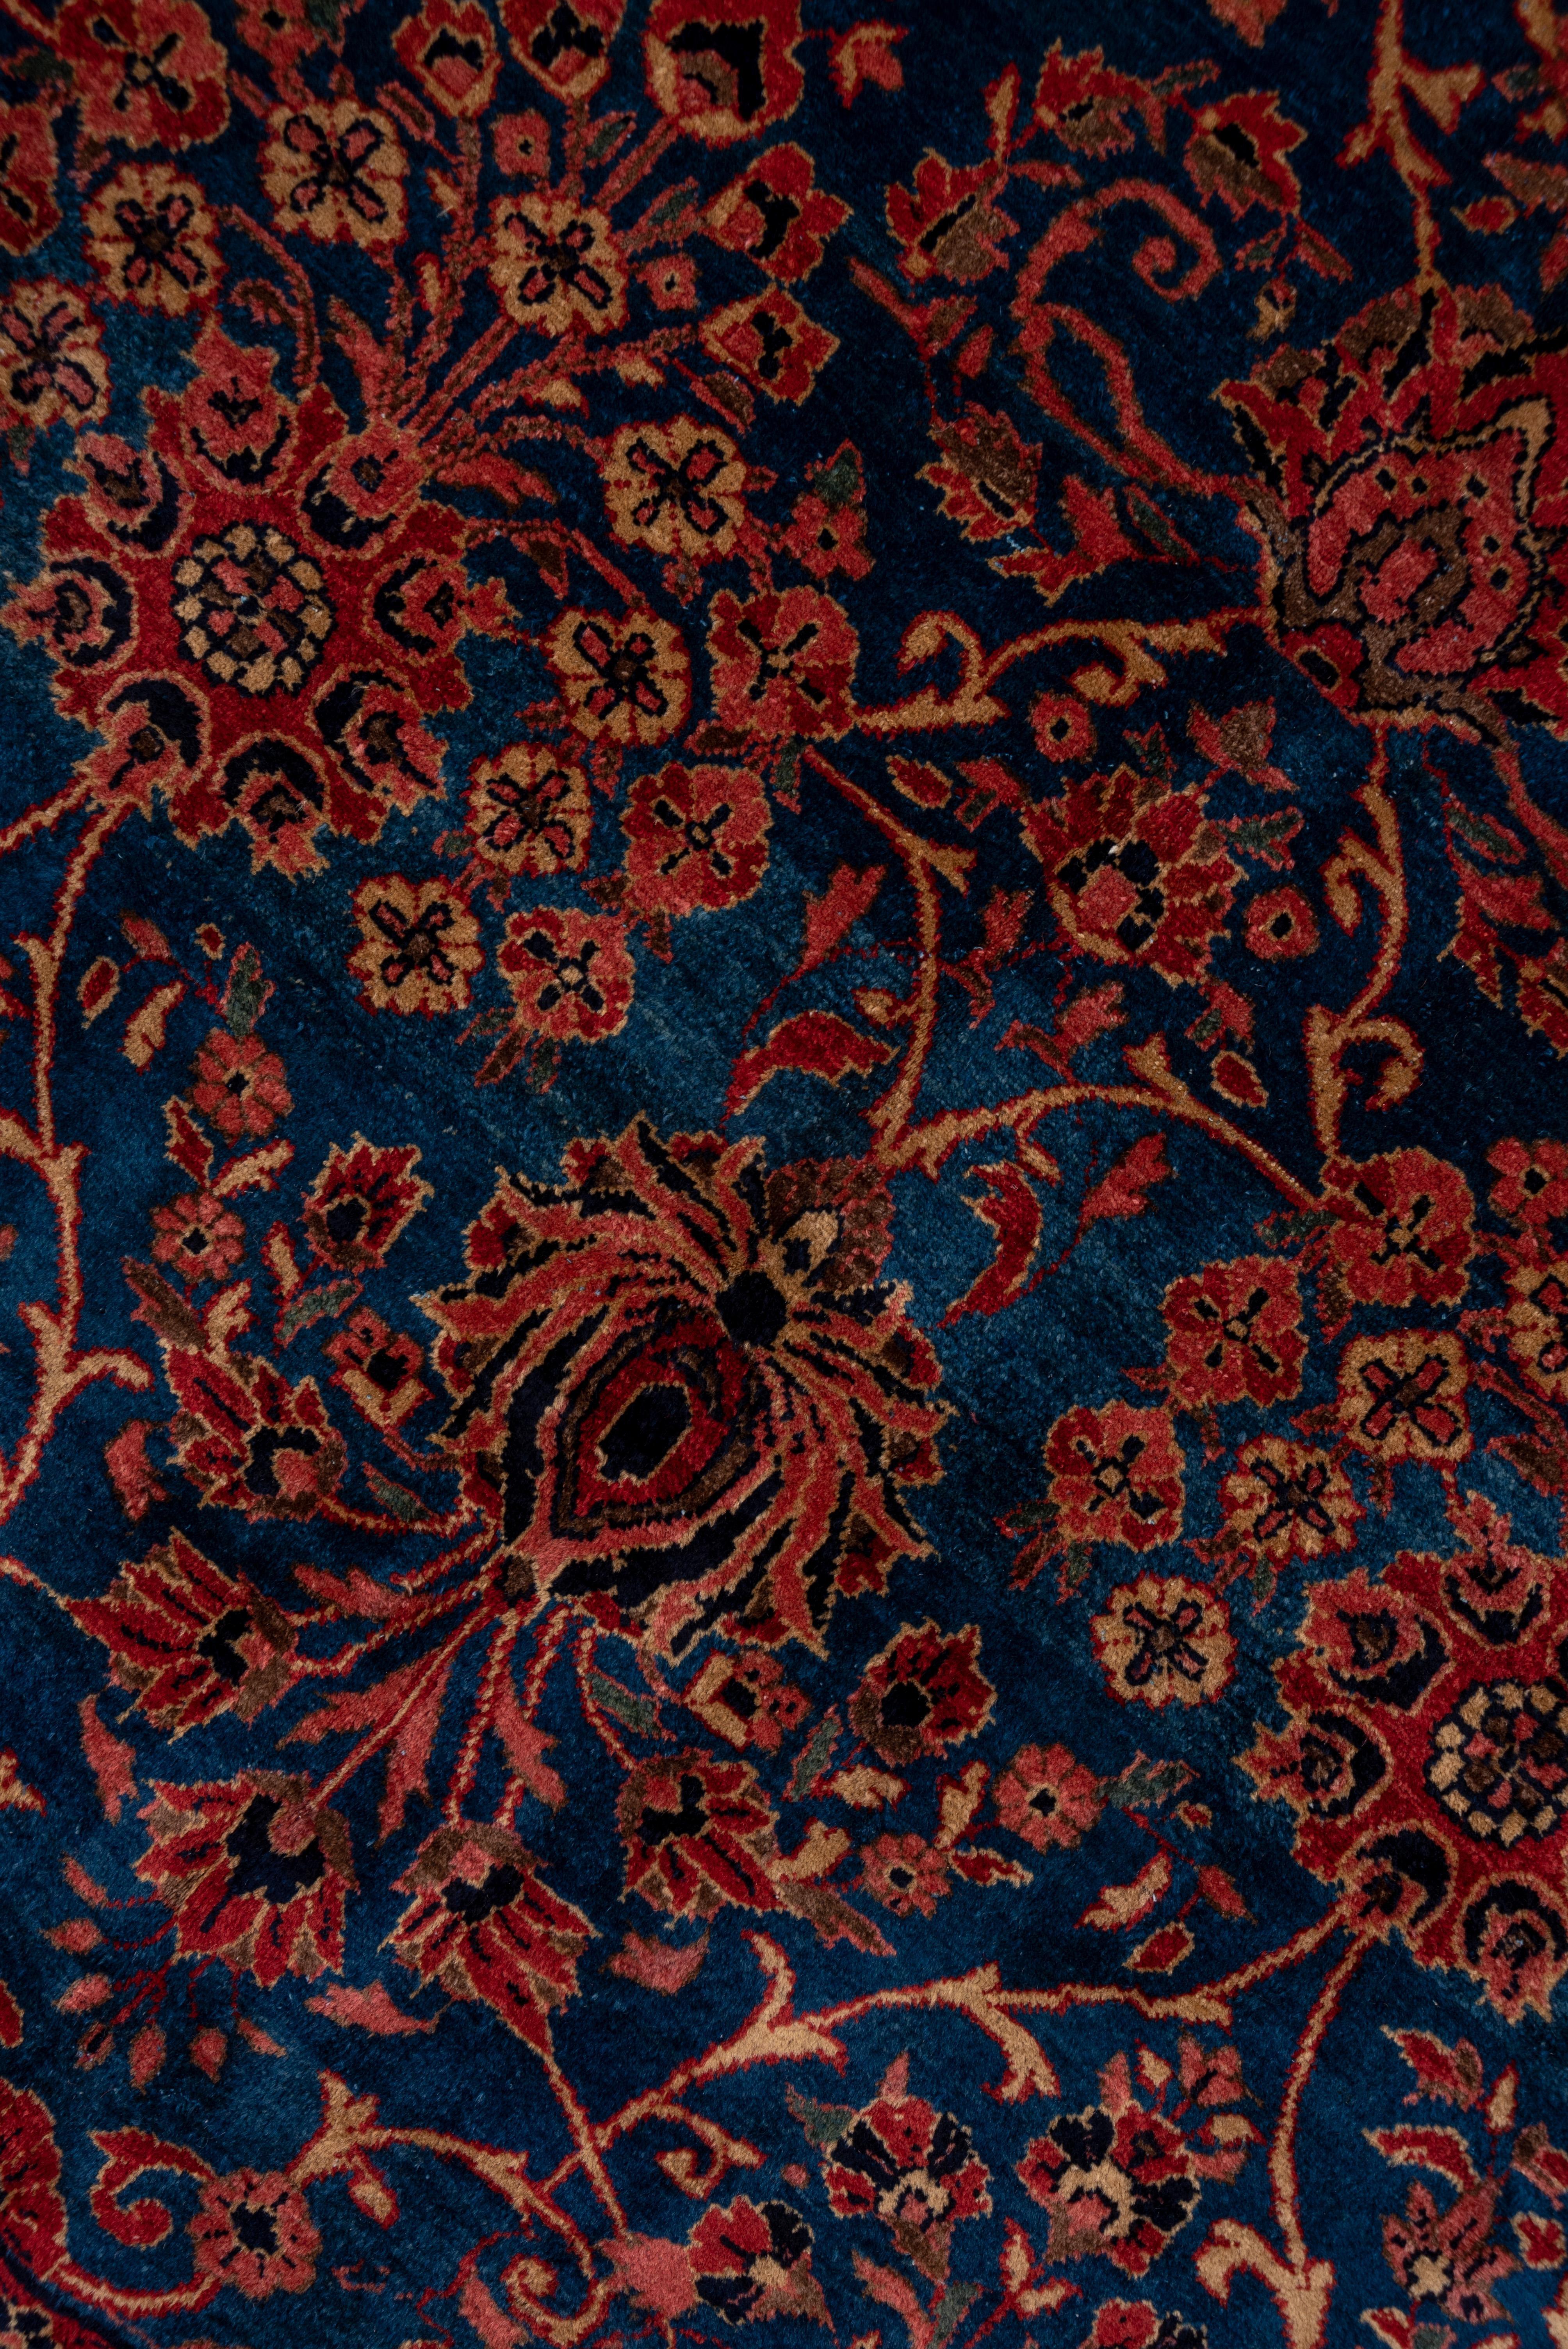 Antique Persian Sarouk Carpet, Royal Blue All-Over Field, Shiny Beige Borders In Good Condition For Sale In New York, NY